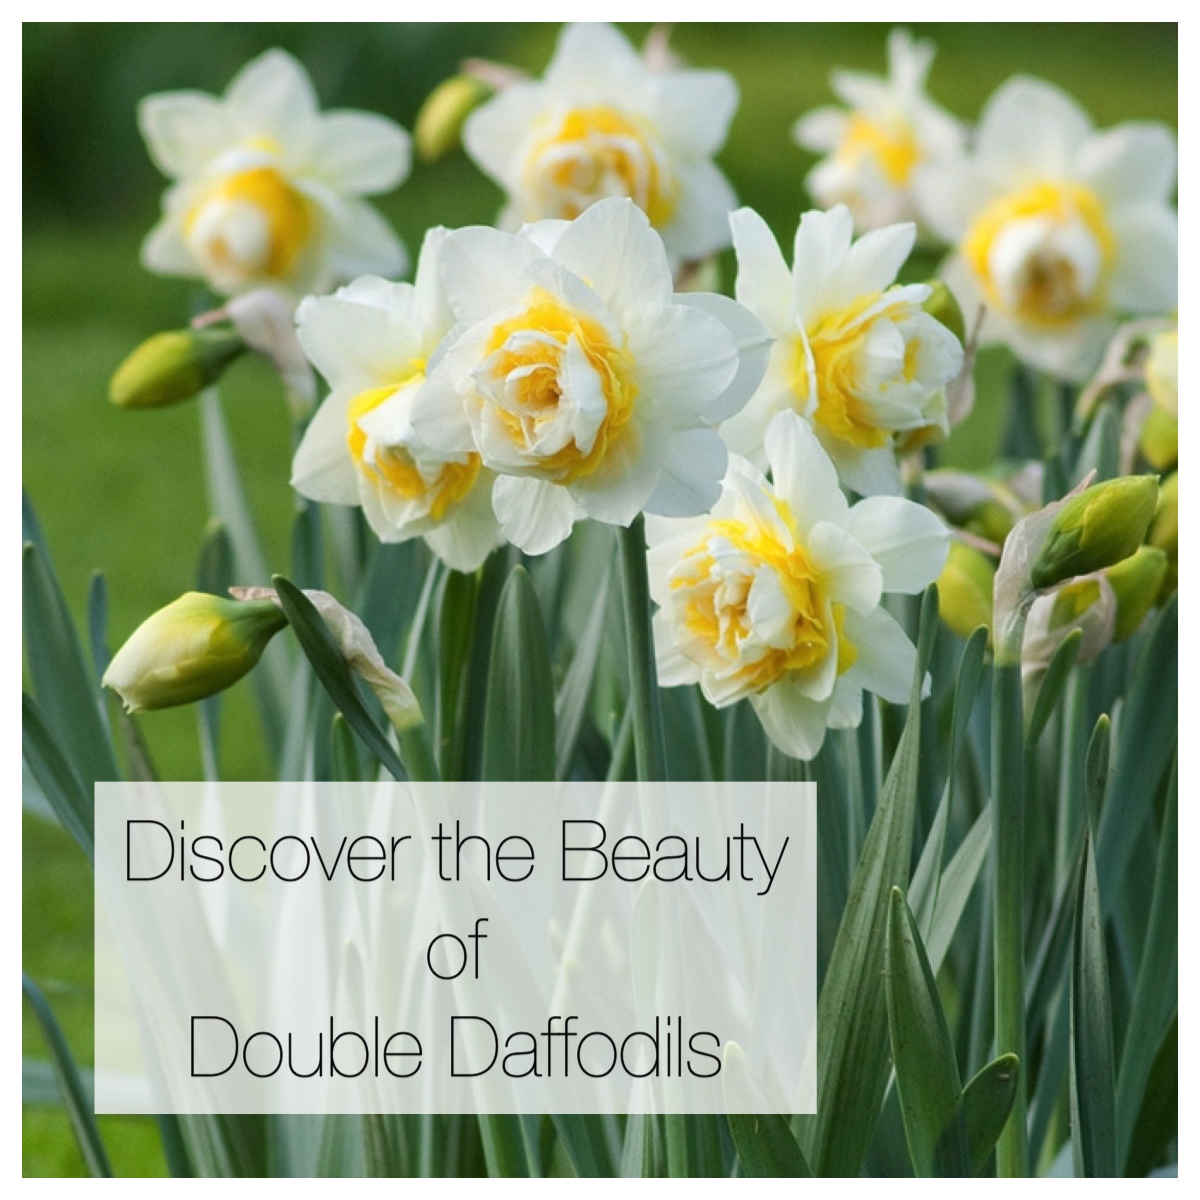 Discover the Beauty of Double Daffodils